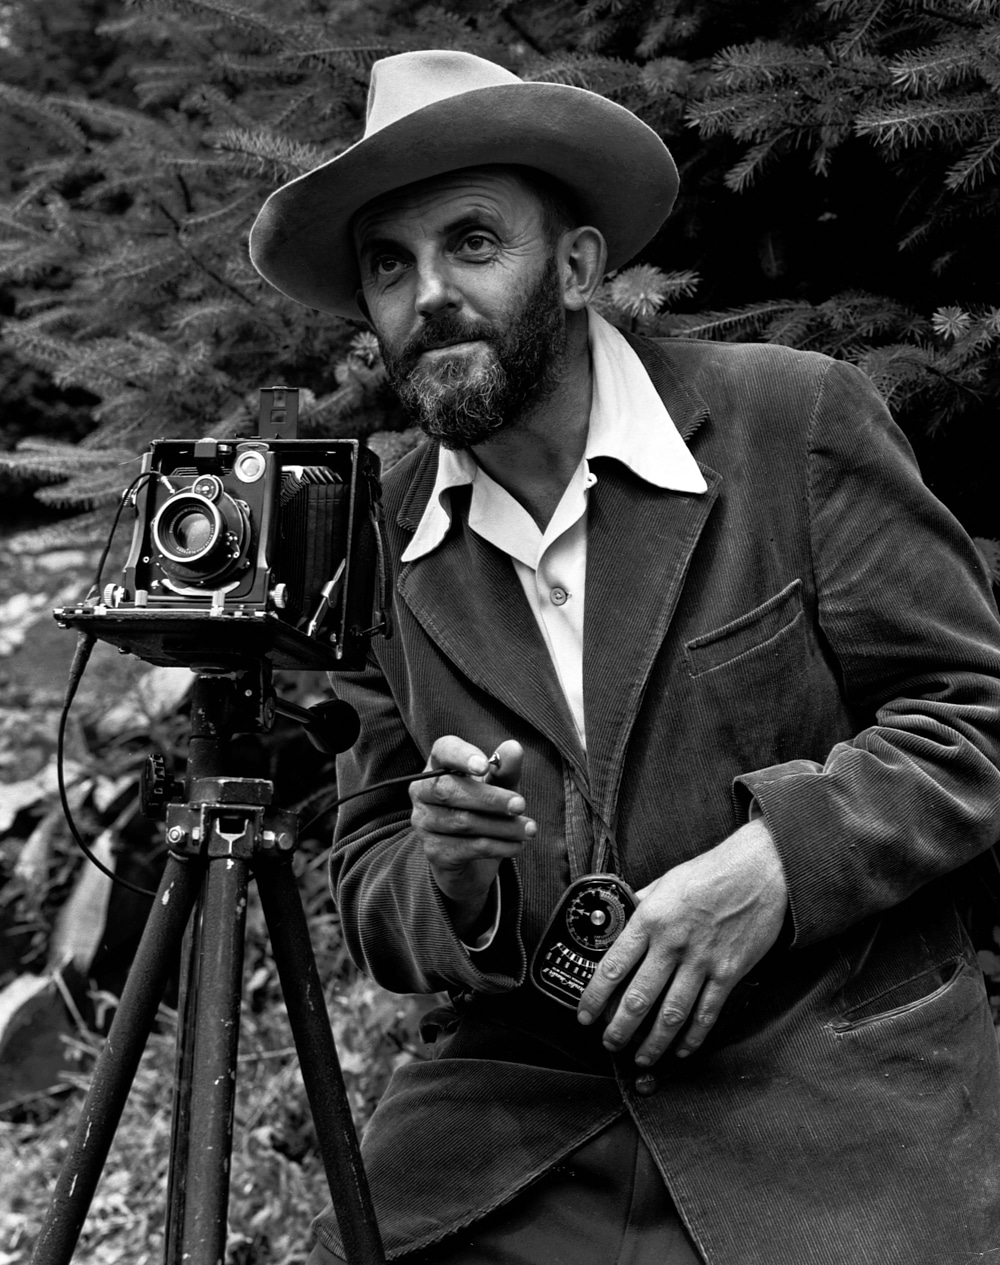 A photo of a bearded Ansel Adams with a camera on a tripod and a light meter in his hand. Adams is wearing a dark jacket and a white shirt, and the open shirt collar is spread over the lapel of his jacket. He is holding a cable release for the camera, and there is a rocky hillside behind him. The photo was taken by J. Malcolm Greany, probably in 1947.